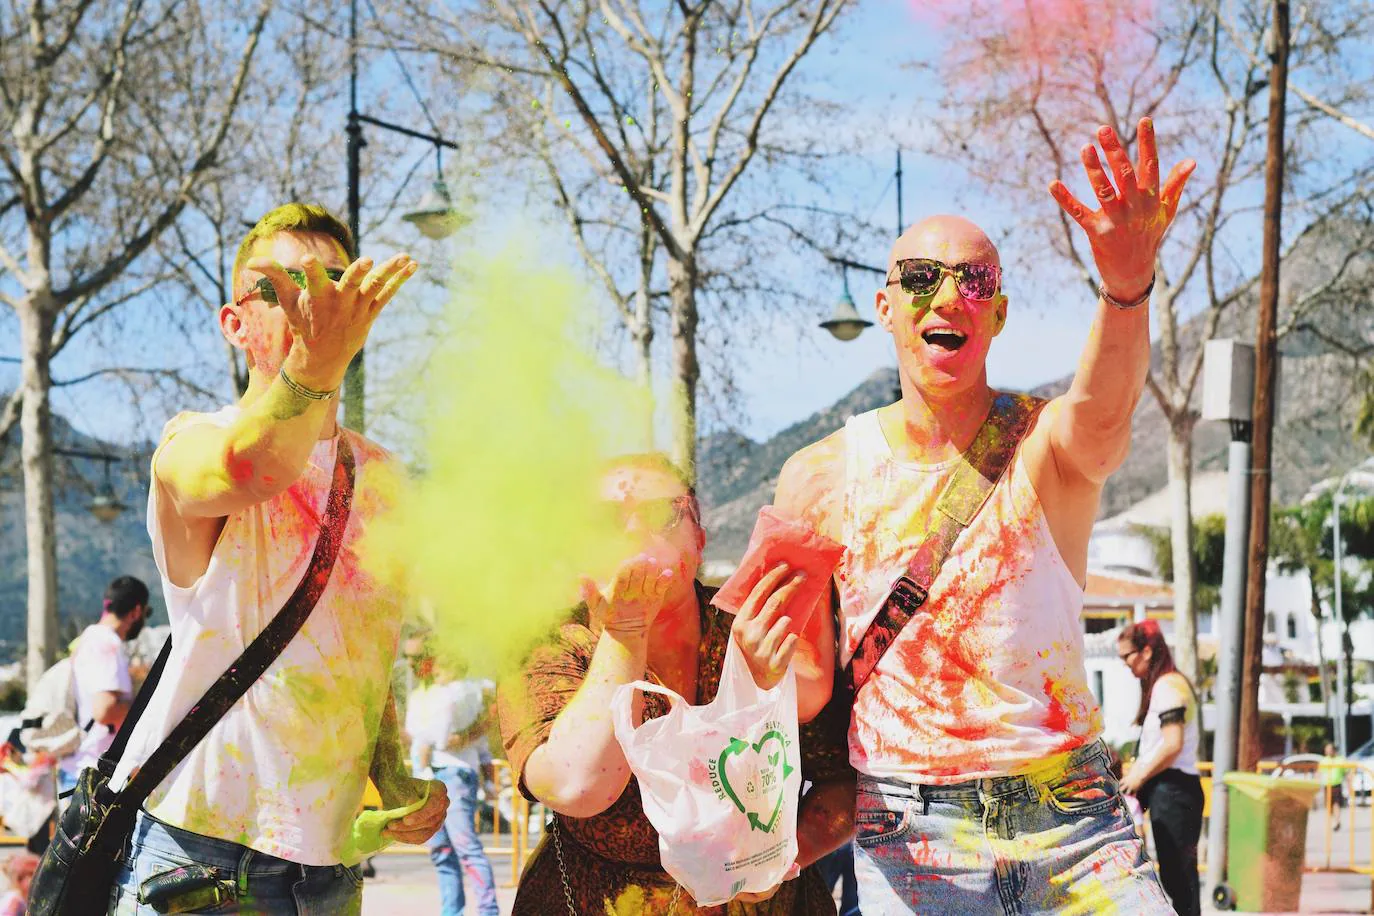 Benalmádena is filled with colour to celebrate Holi, in pictures